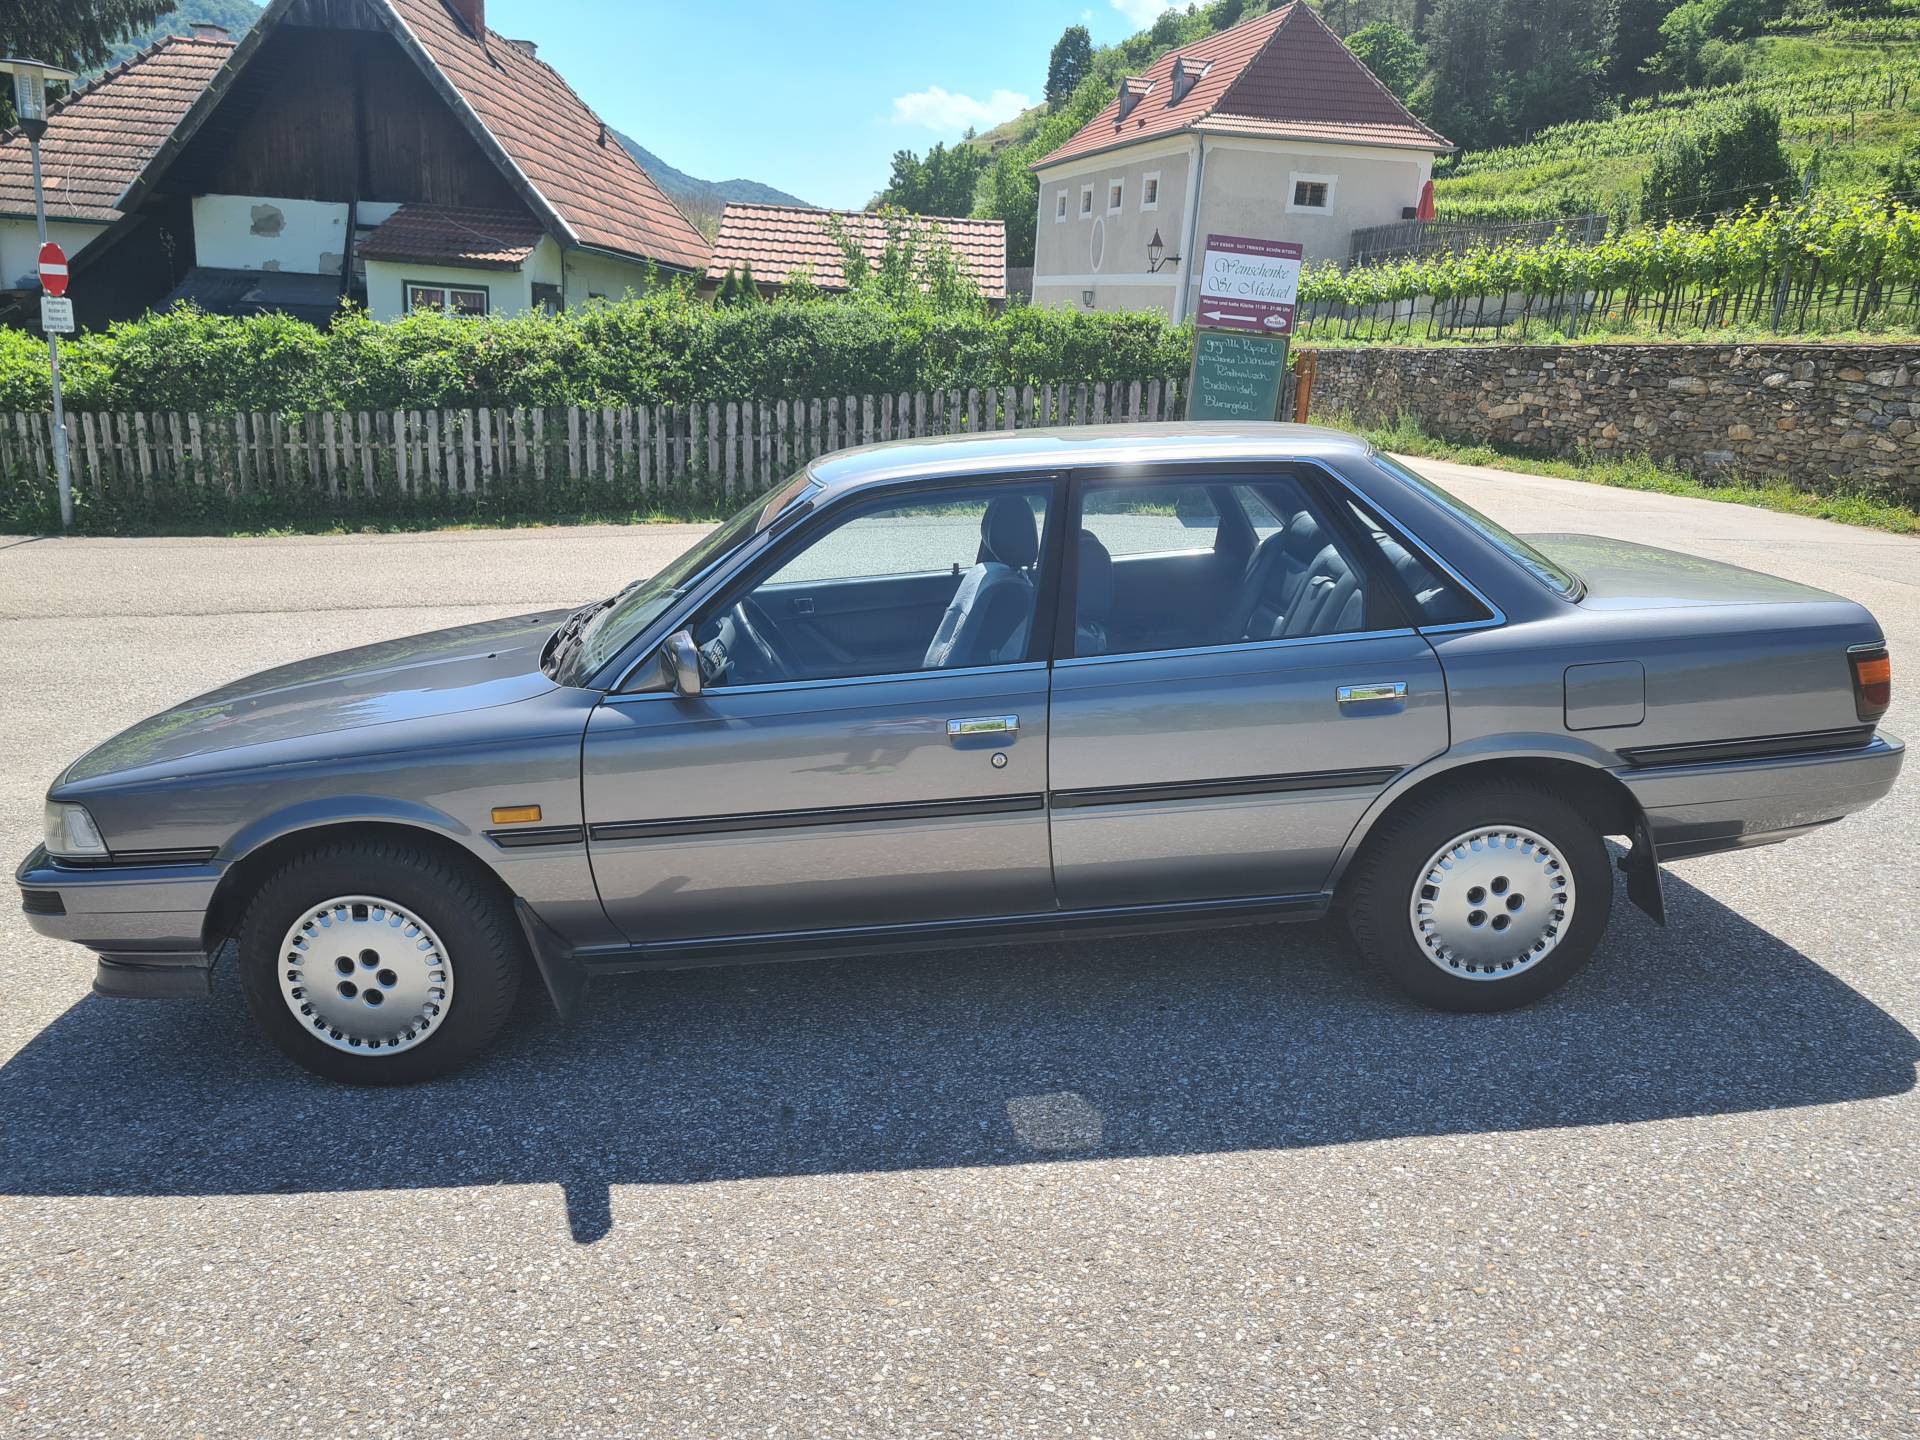 For Sale: Toyota Camry (1990) offered for GBP 3,349